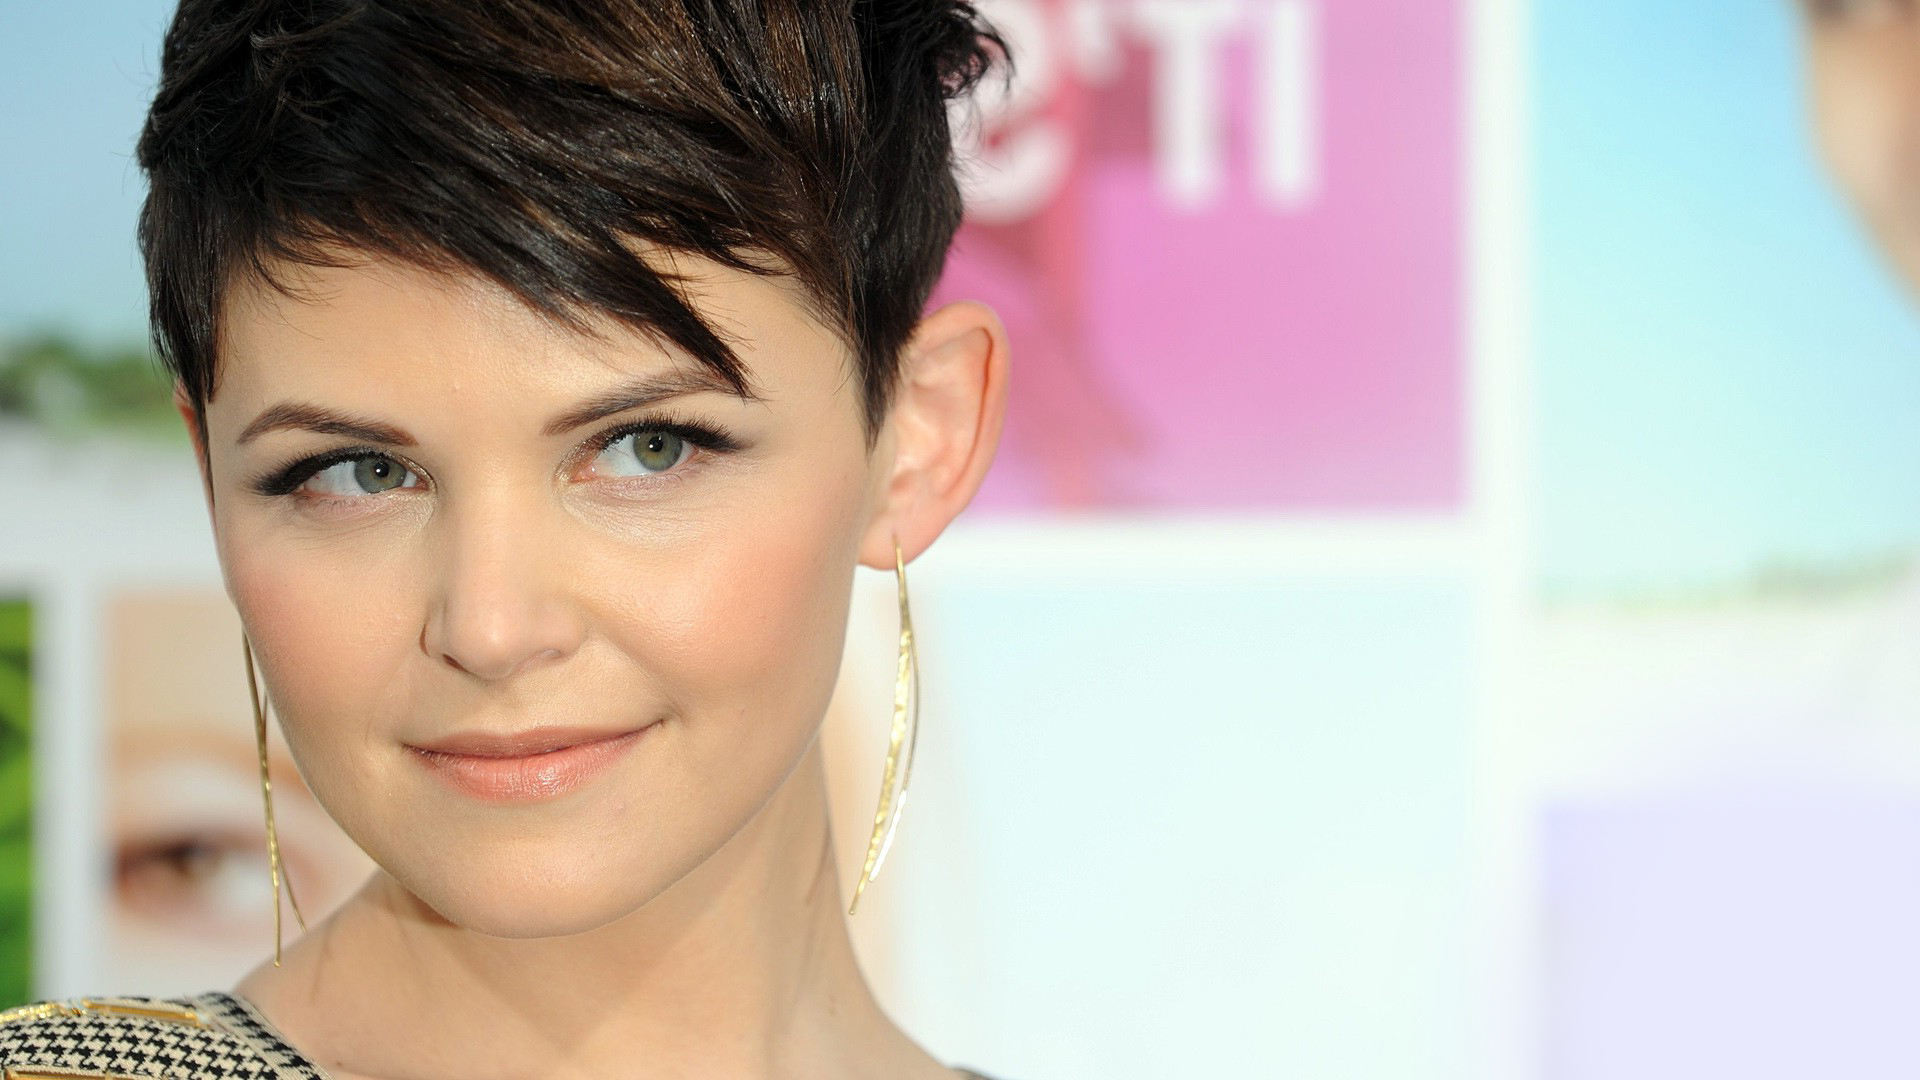 30 Gorgeous Short Haircuts For Round Faces